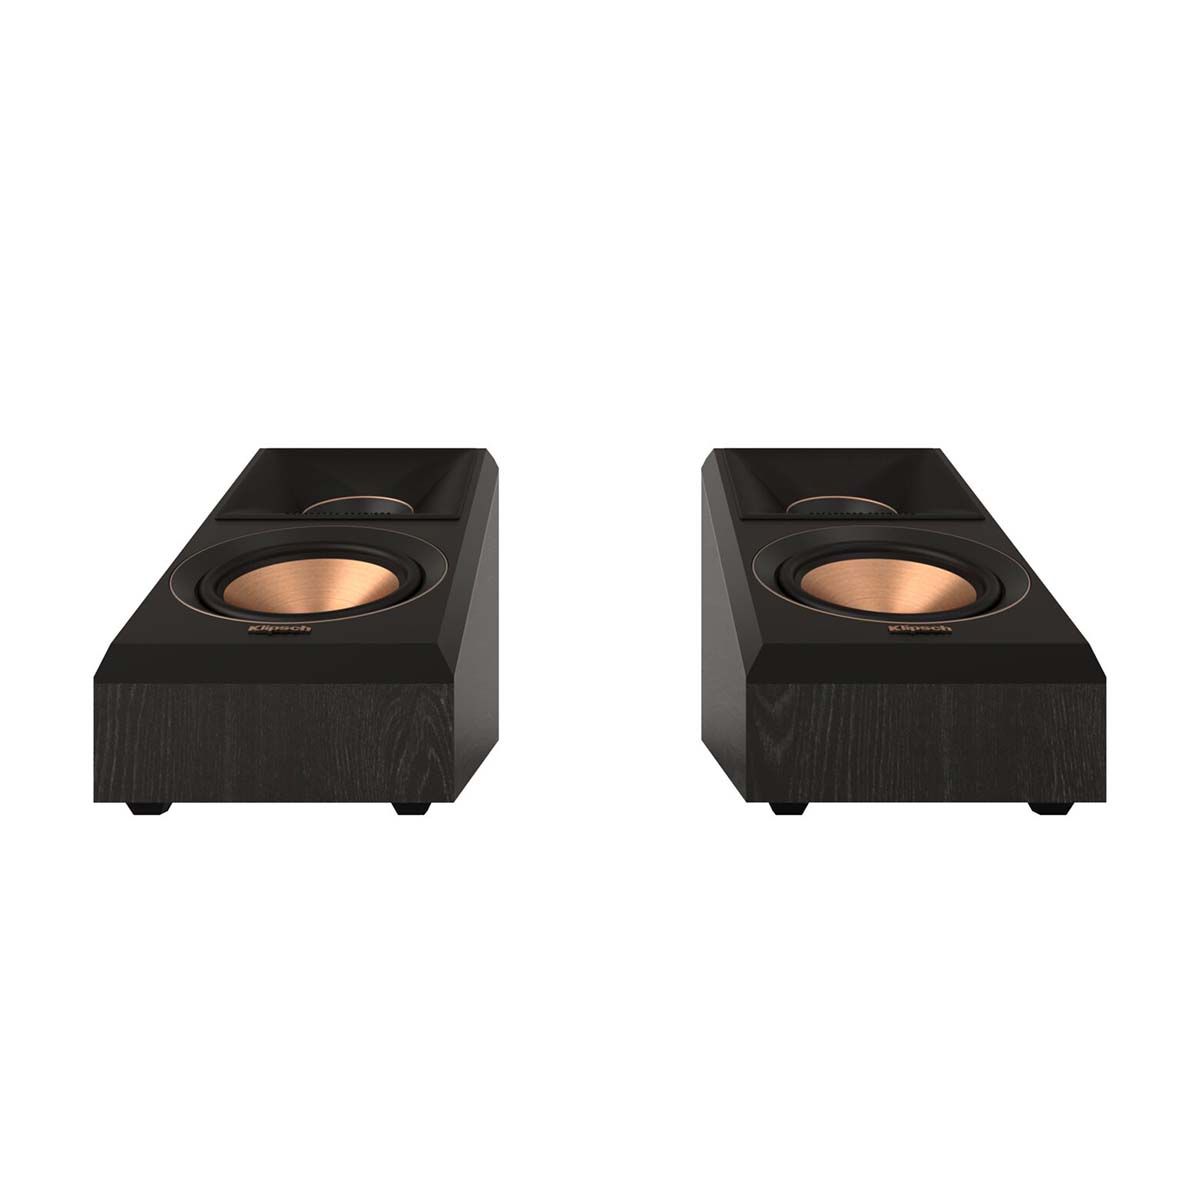 Klipsch RP-500SA II Surround/Atmos Speakers - Ebony - Pair - front view of pair without grills